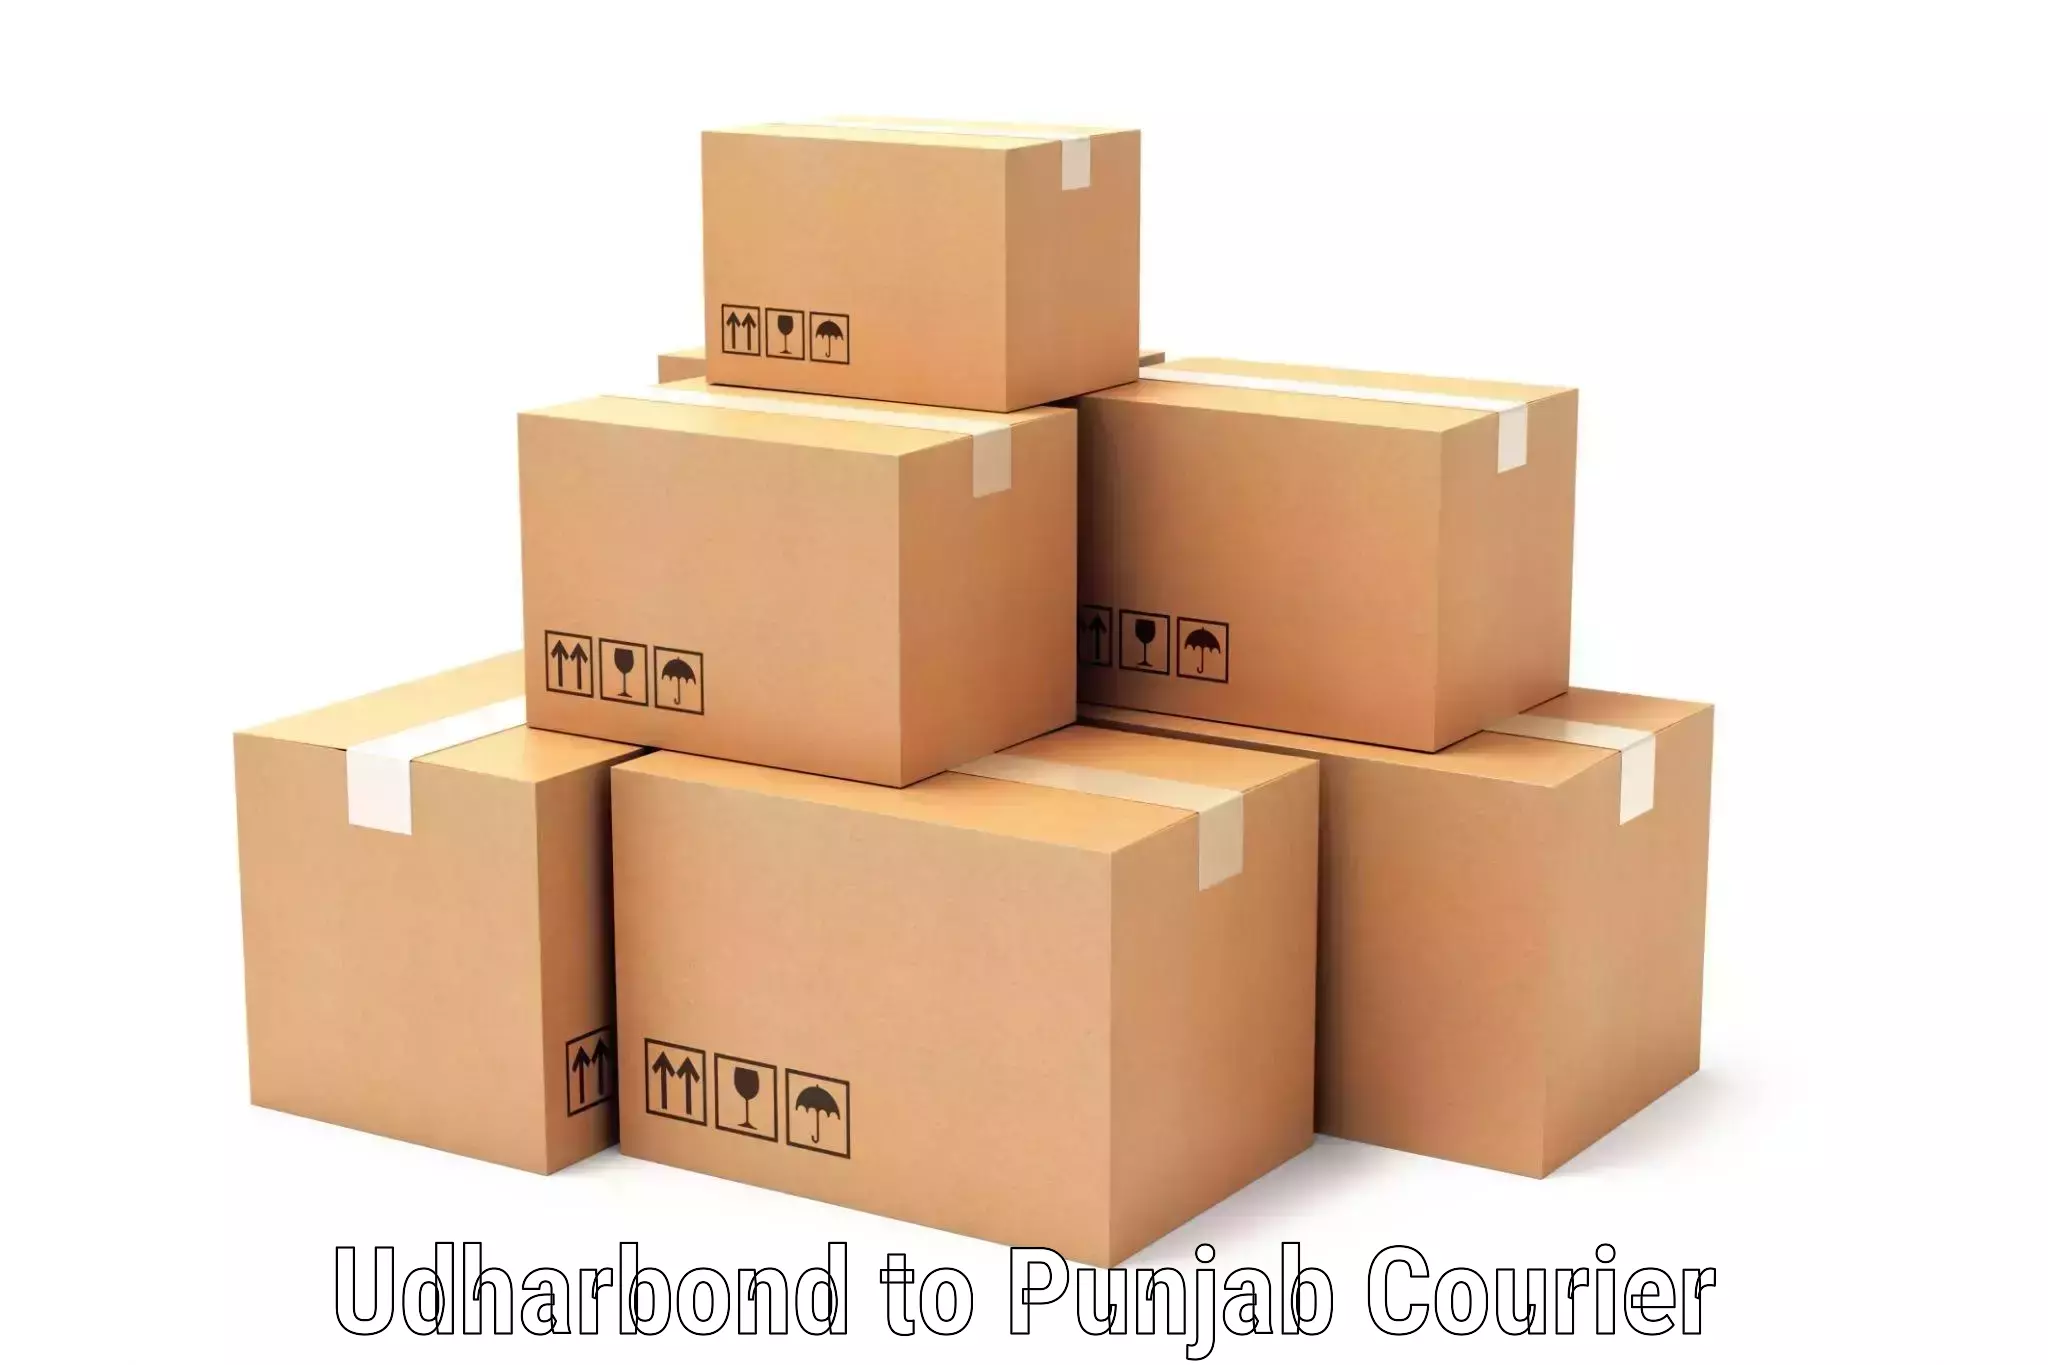 Innovative courier solutions in Udharbond to Patiala